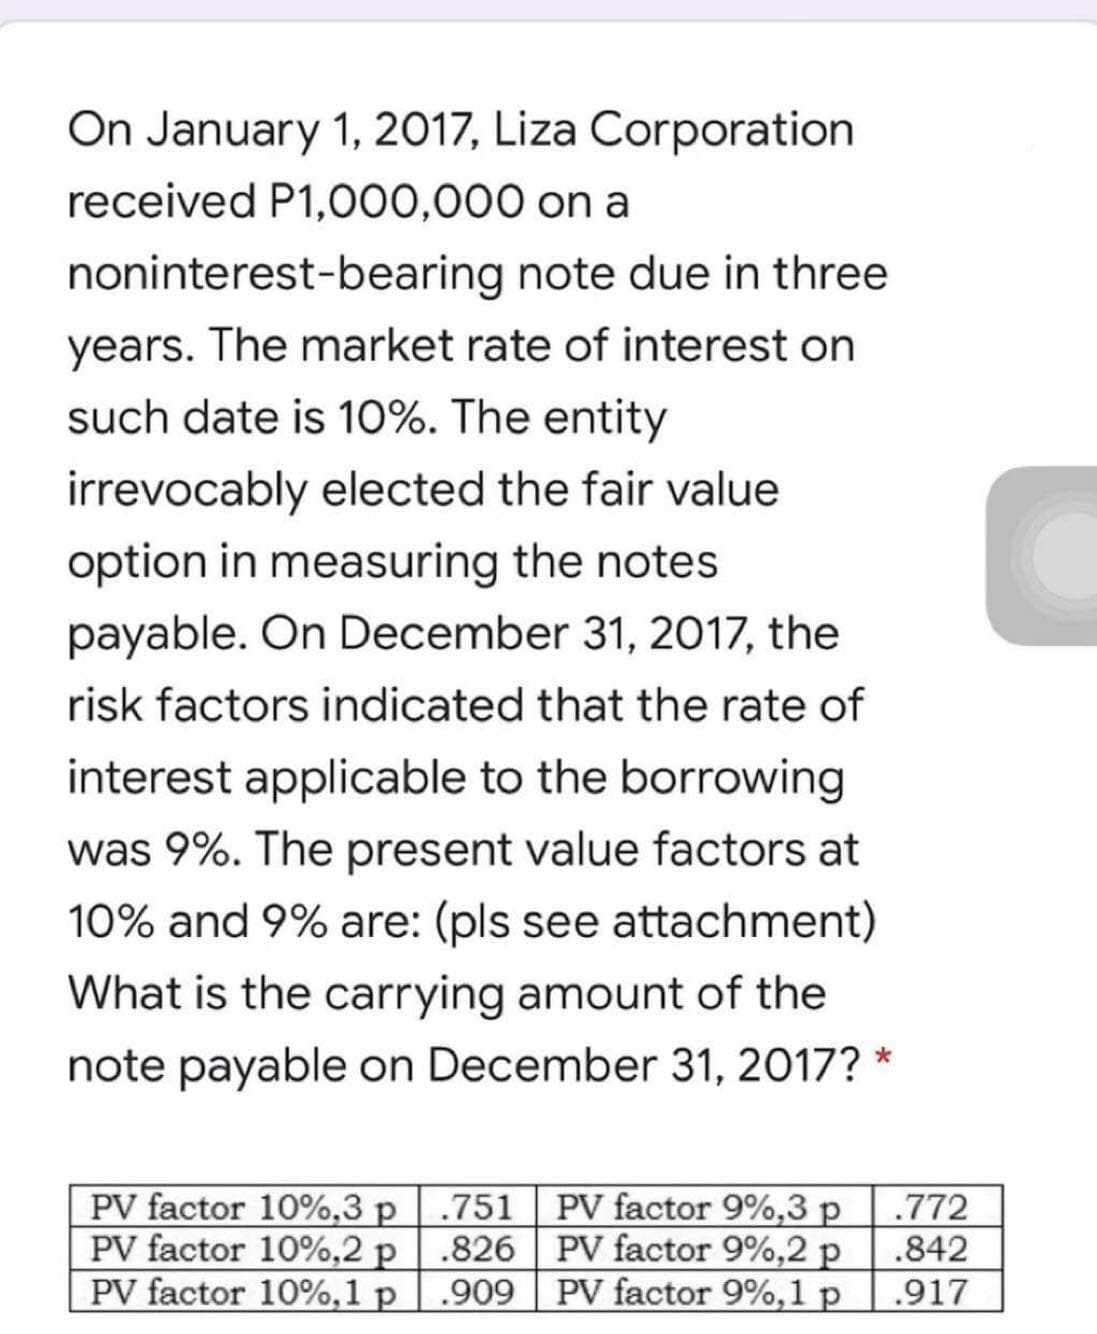 On January 1, 2017, Liza Corporation
received P1,000,000 on a
noninterest-bearing note due in three
years. The market rate of interest on
such date is 10%. The entity
irrevocably elected the fair value
option in measuring the notes
payable. On December 31, 2017, the
risk factors indicated that the rate of
interest applicable to the borrowing
was 9%. The present value factors at
10% and 9% are: (pls see attachment)
What is the carrying amount of the
note payable on December 31, 2017? *
PV factor 10%,3 p
PV factor 10%,2 p
PV factor 10%,1 p
.751 PV factor 9%,3 p
.826 PV factor 9%,2 p
.909 PV factor 9%,1 p
.772
.842
.917
